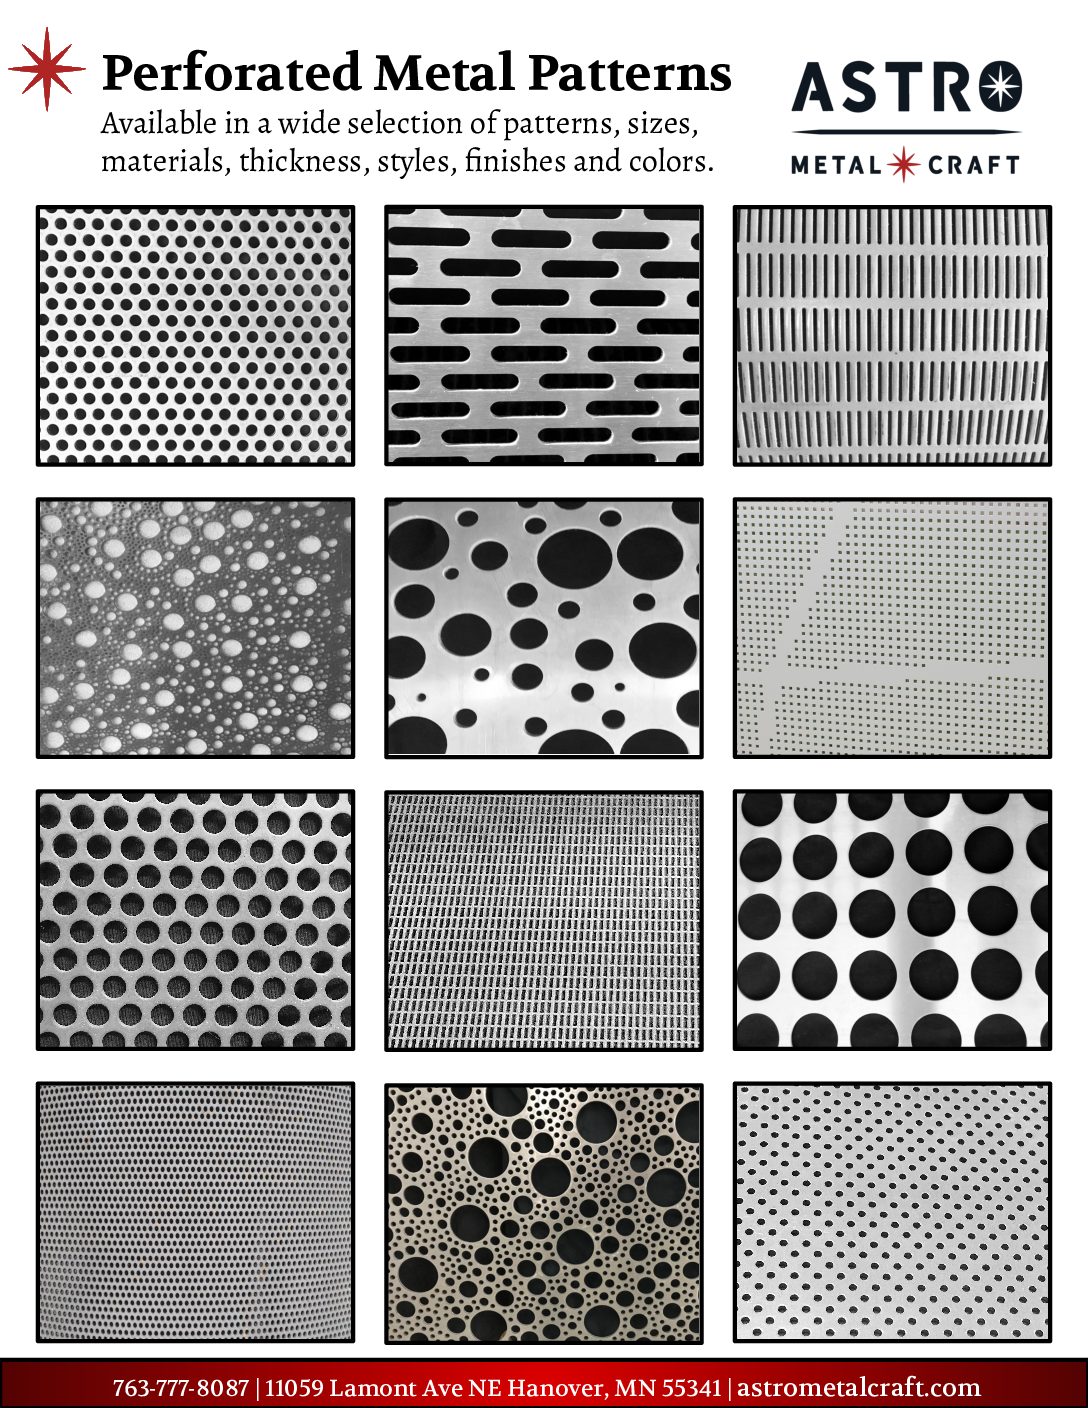 Astro Metal Craft – Perforated Metal Patterns Line Card